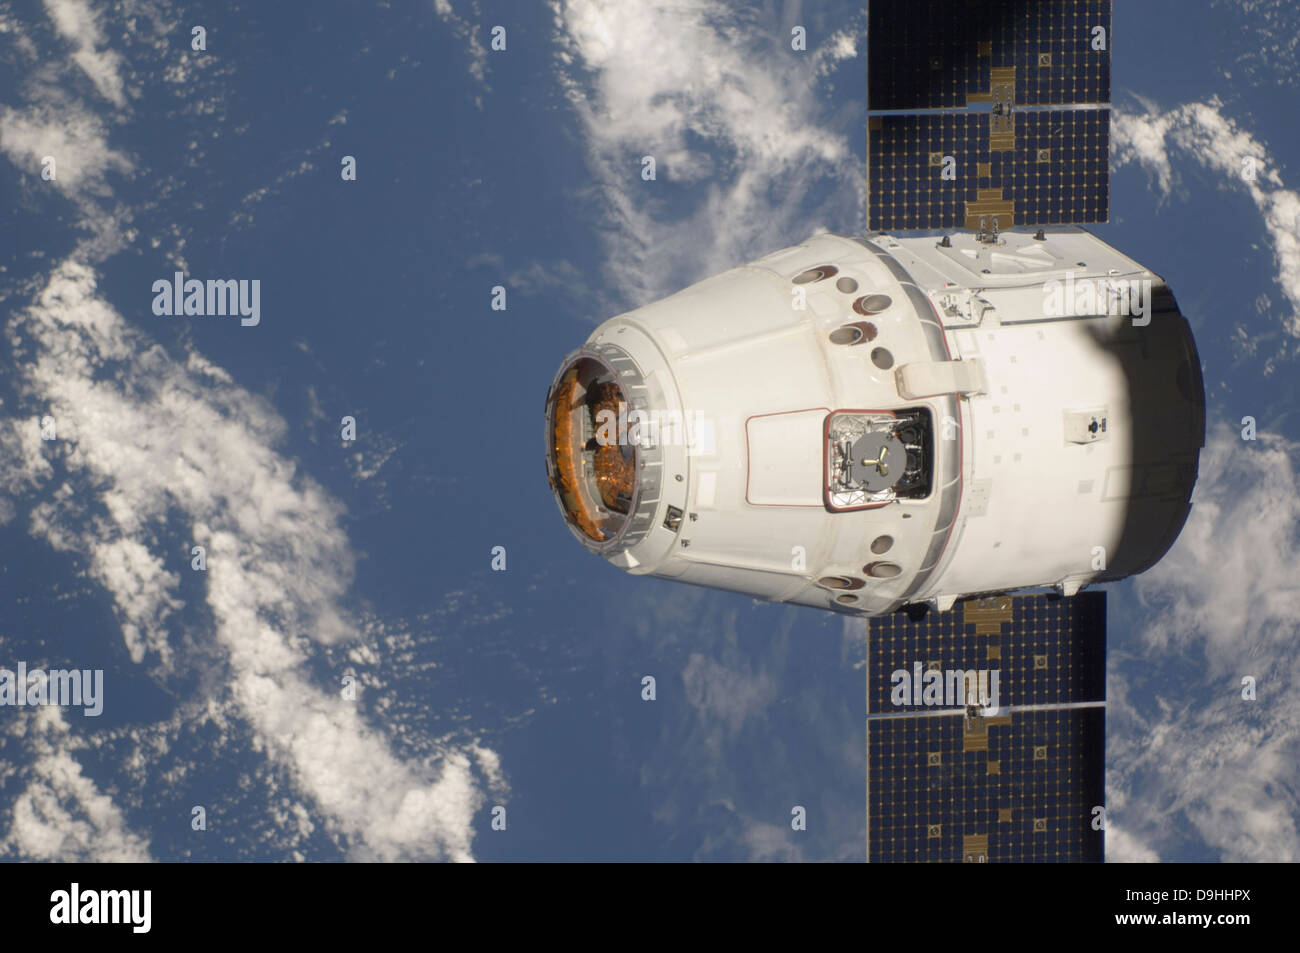 May 25, 2012 - The SpaceX Dragon commercial cargo craft approaches the International Space Station for grapple and berthing. Stock Photo